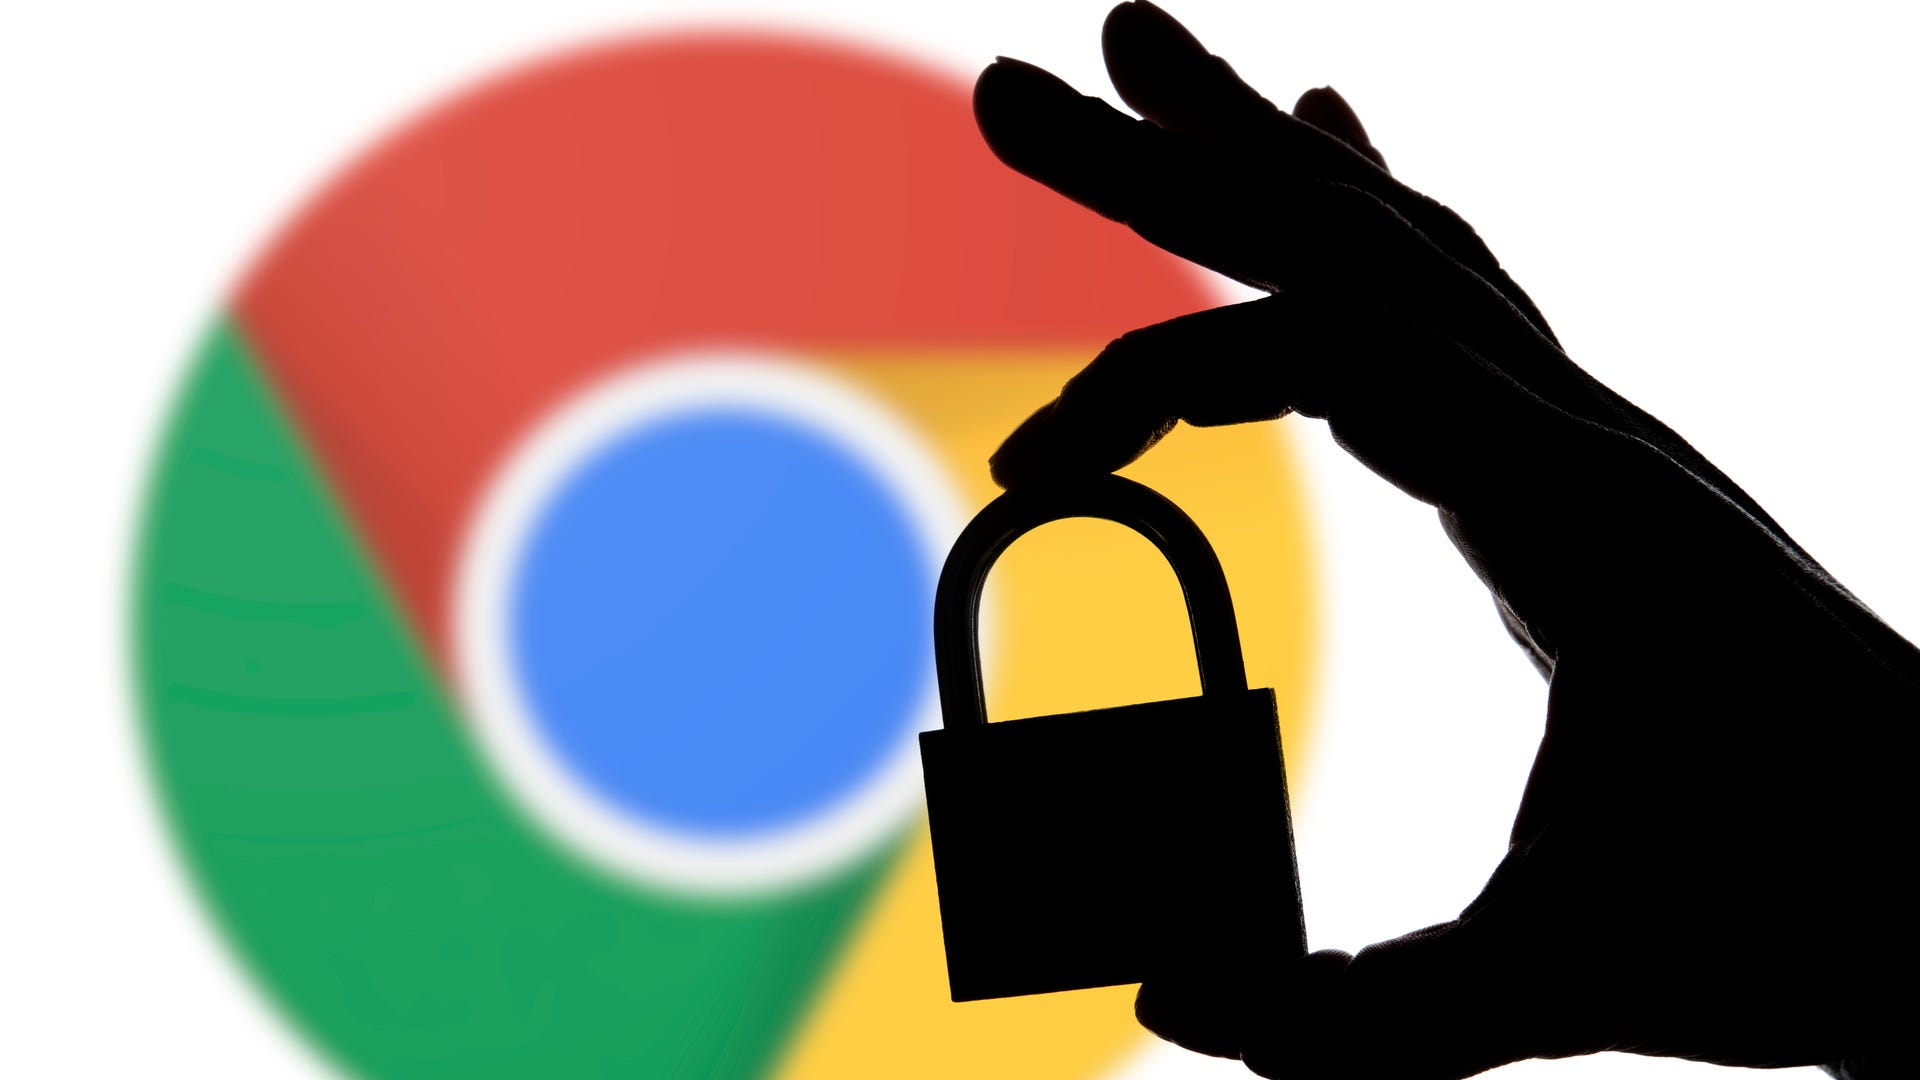 Chrome for Android Finally Gets More Secure Incognito Browsing